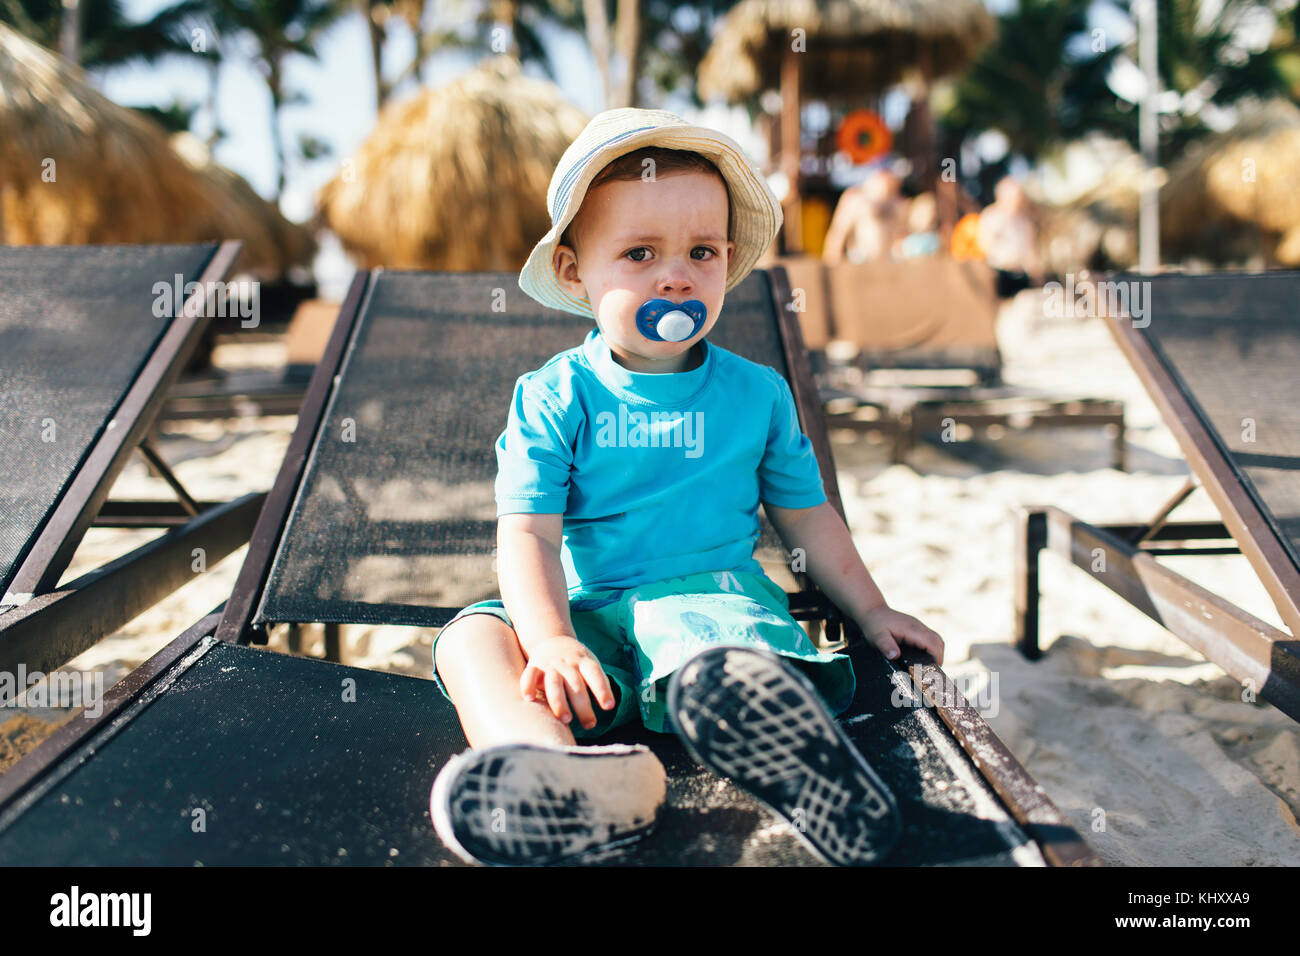 Portrait of young boy sitting on sun lounger Stock Photo